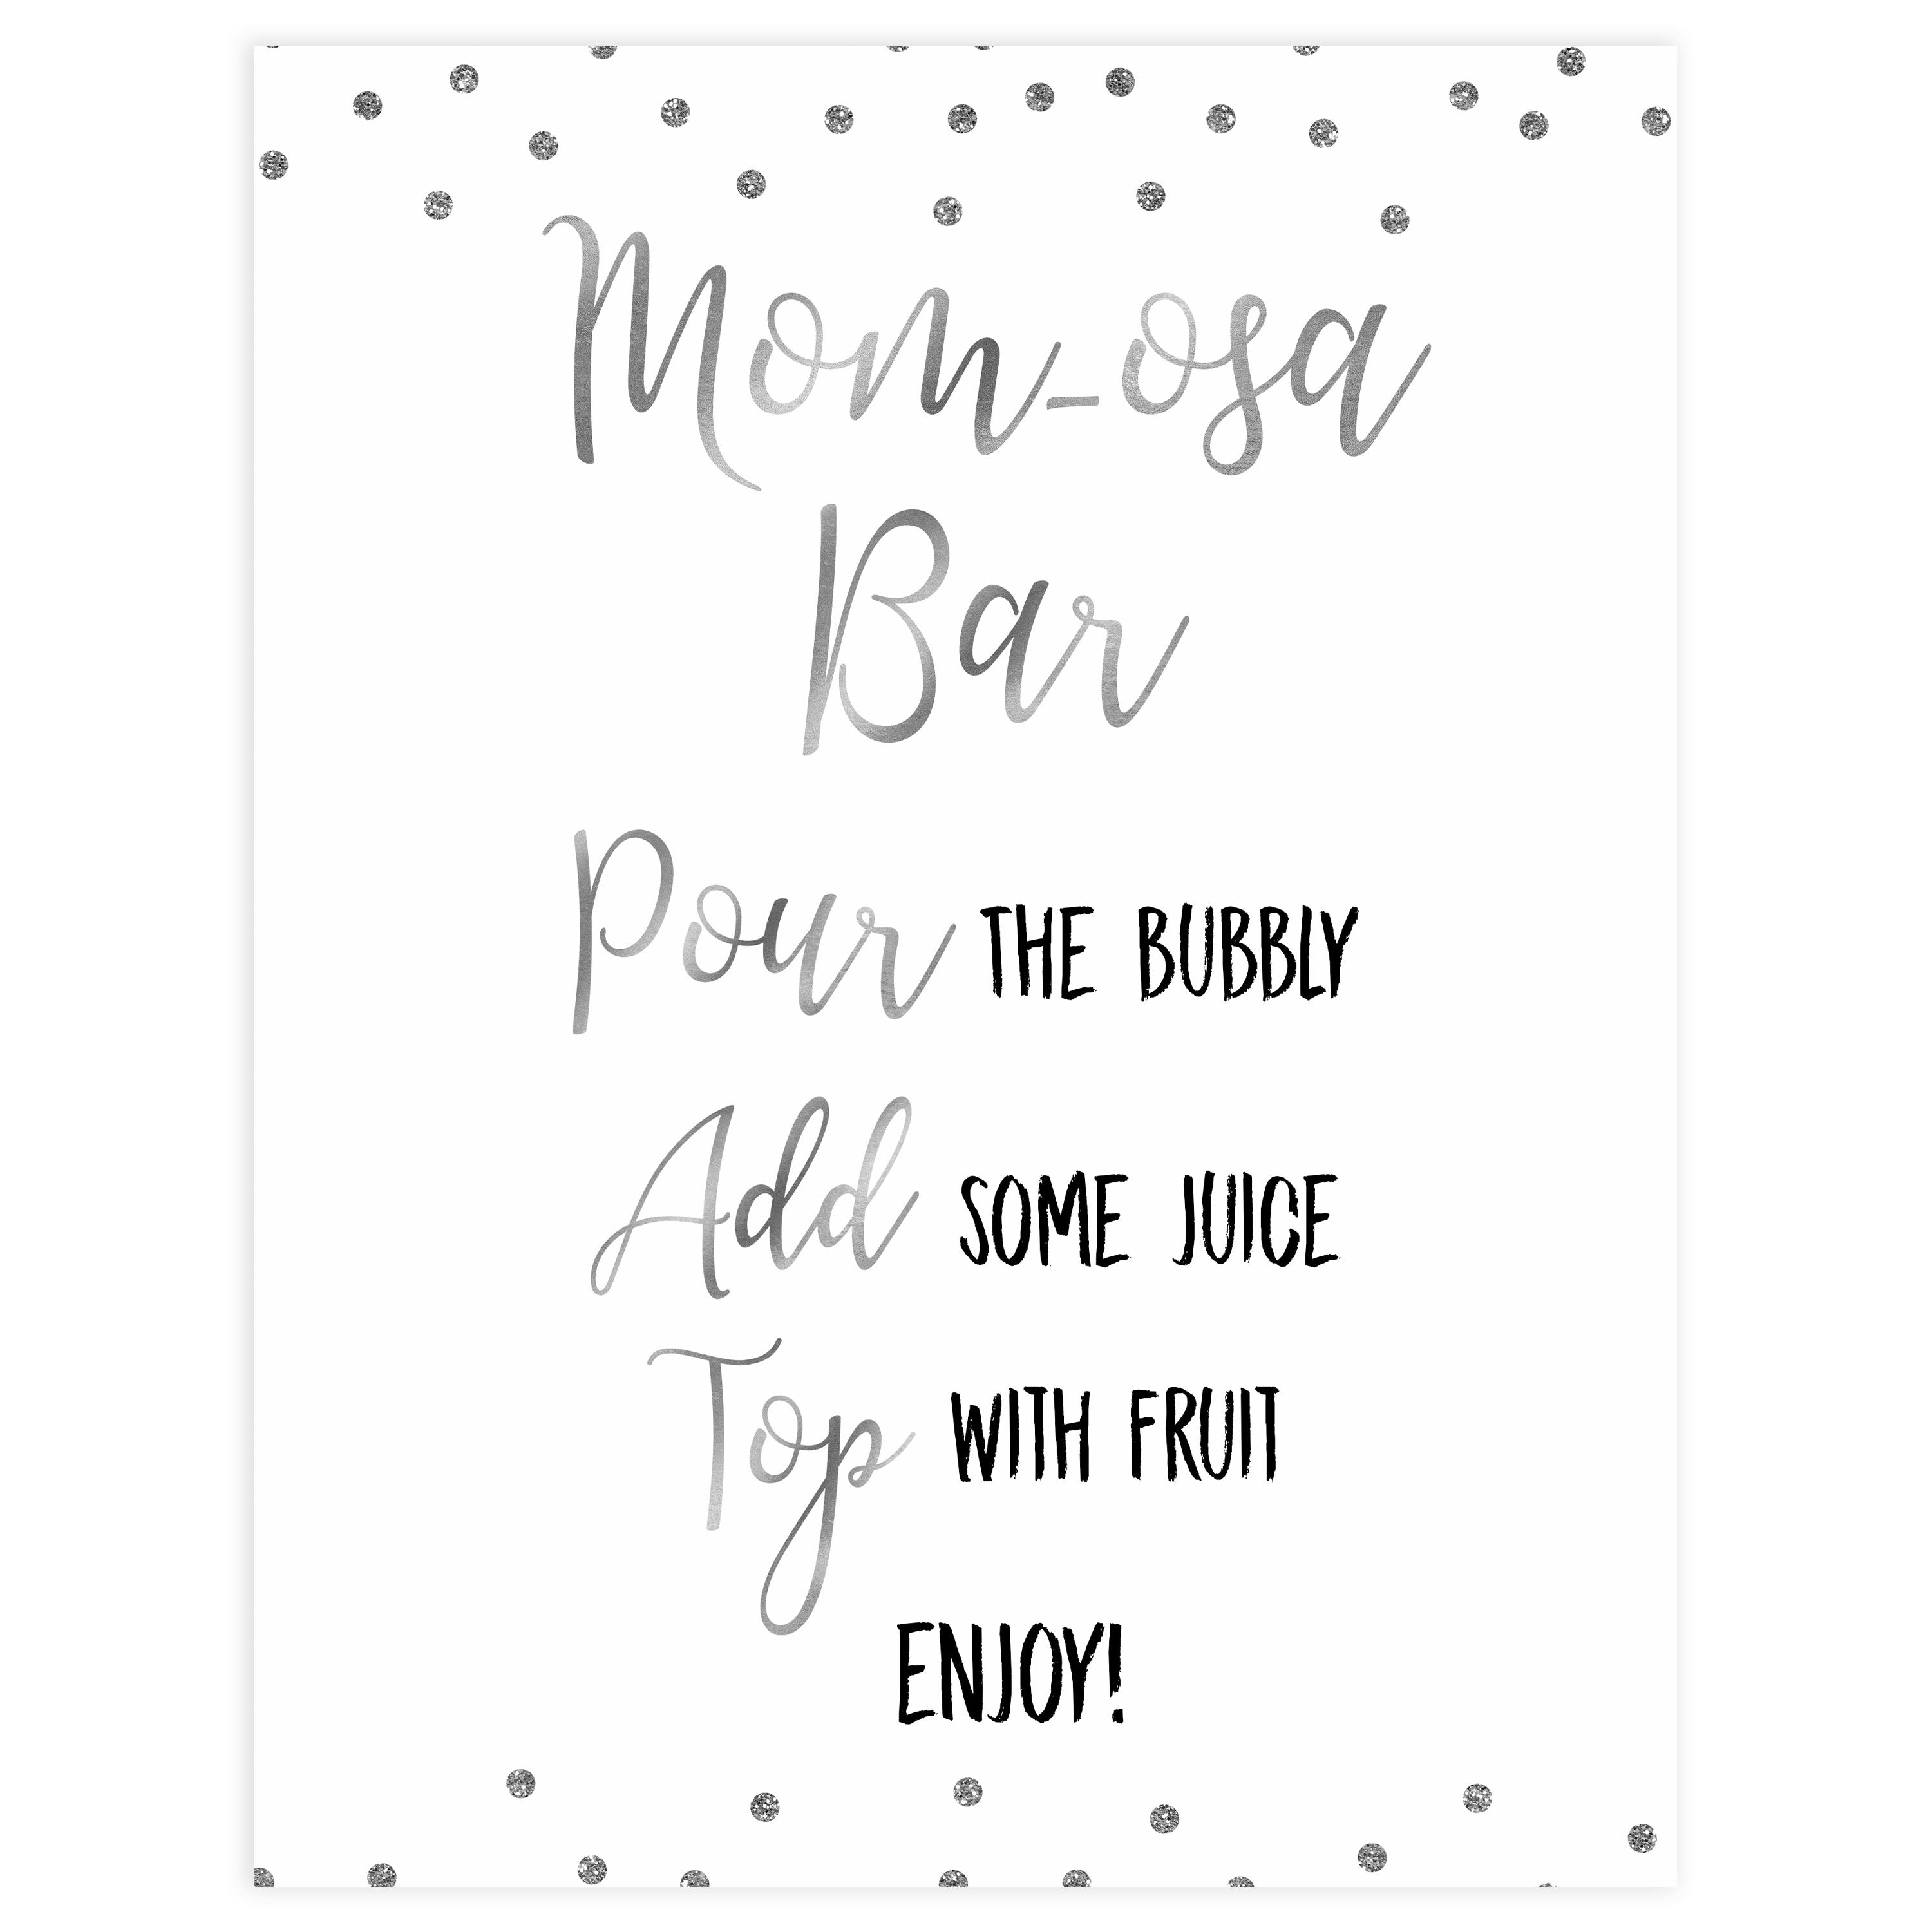 momosa table baby signs, Baby silver glitter baby decor, printable baby table signs, printable baby decor, baby silver glitter table signs, fun baby signs, baby silver fun baby table signs